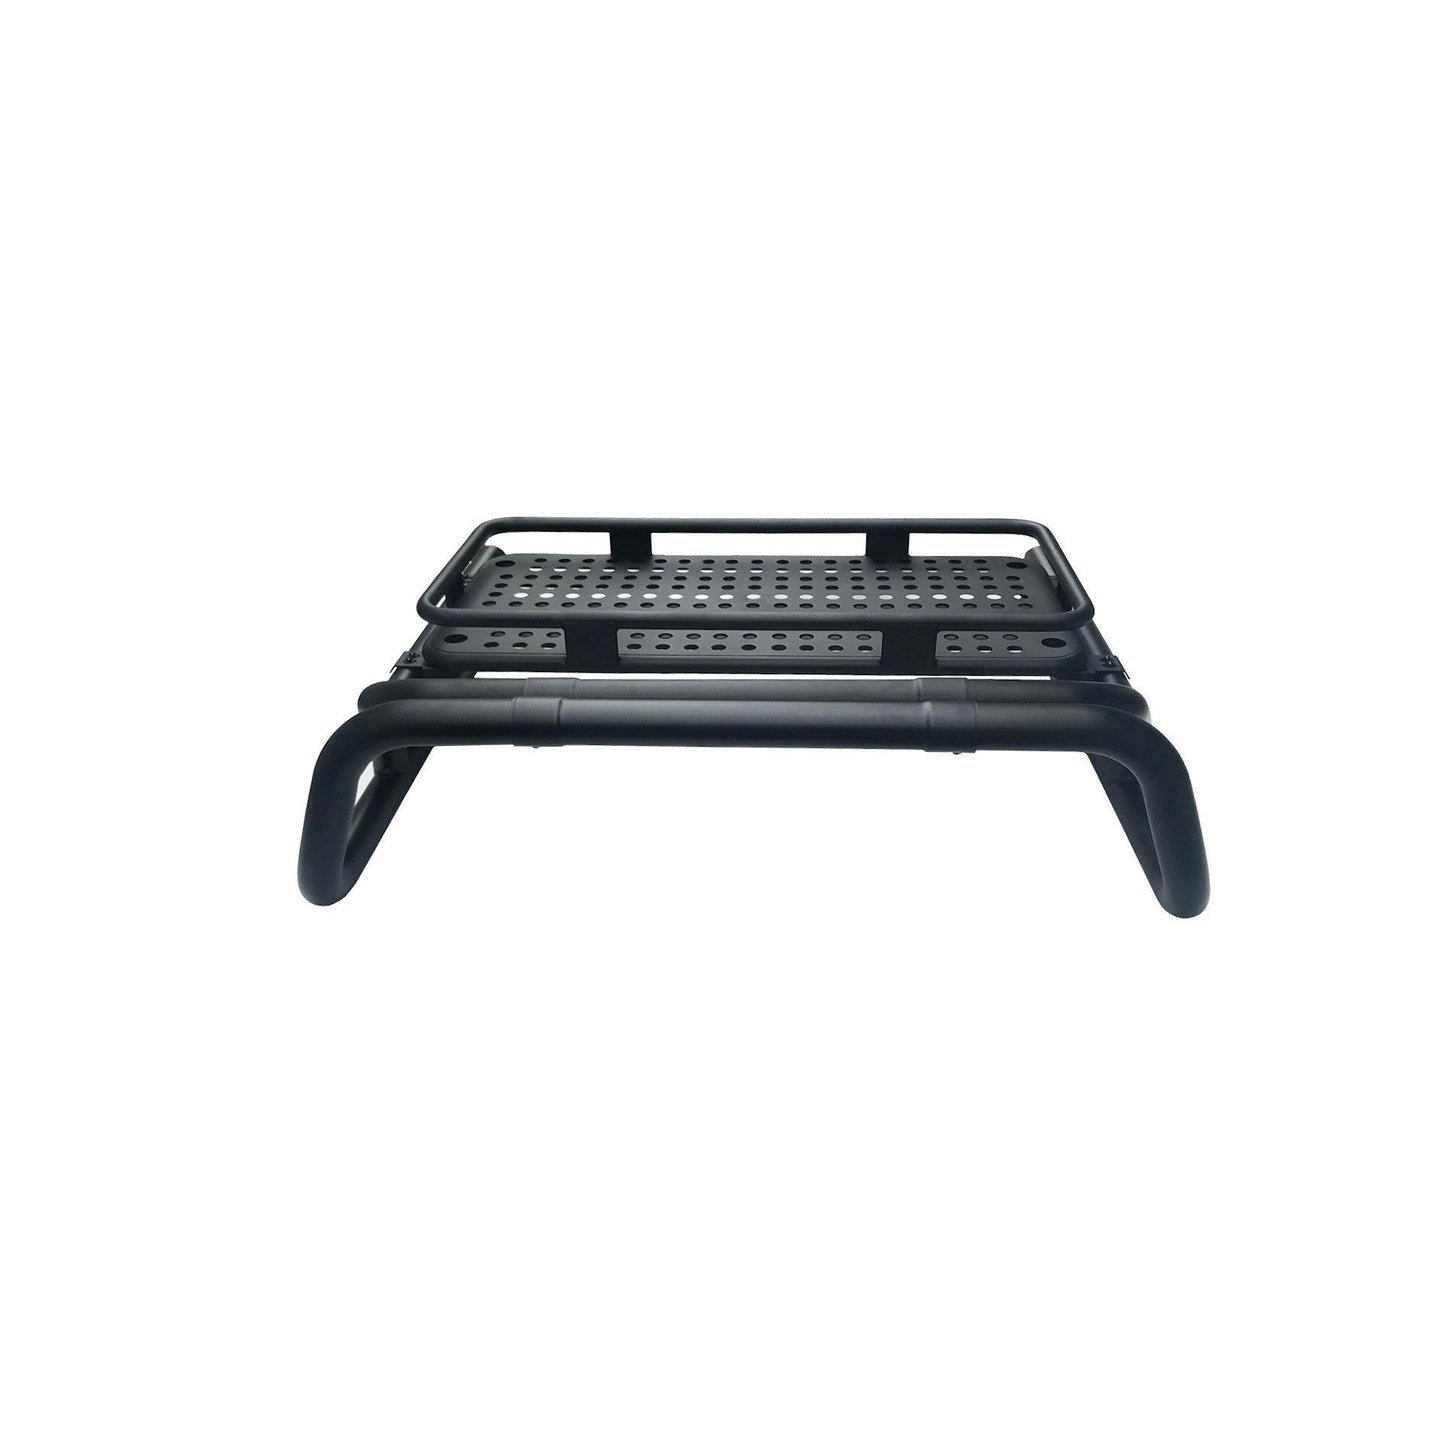 Black Long Arm Roll Sports Bar with Cargo Basket Rack for the Isuzu D-Max 07-12